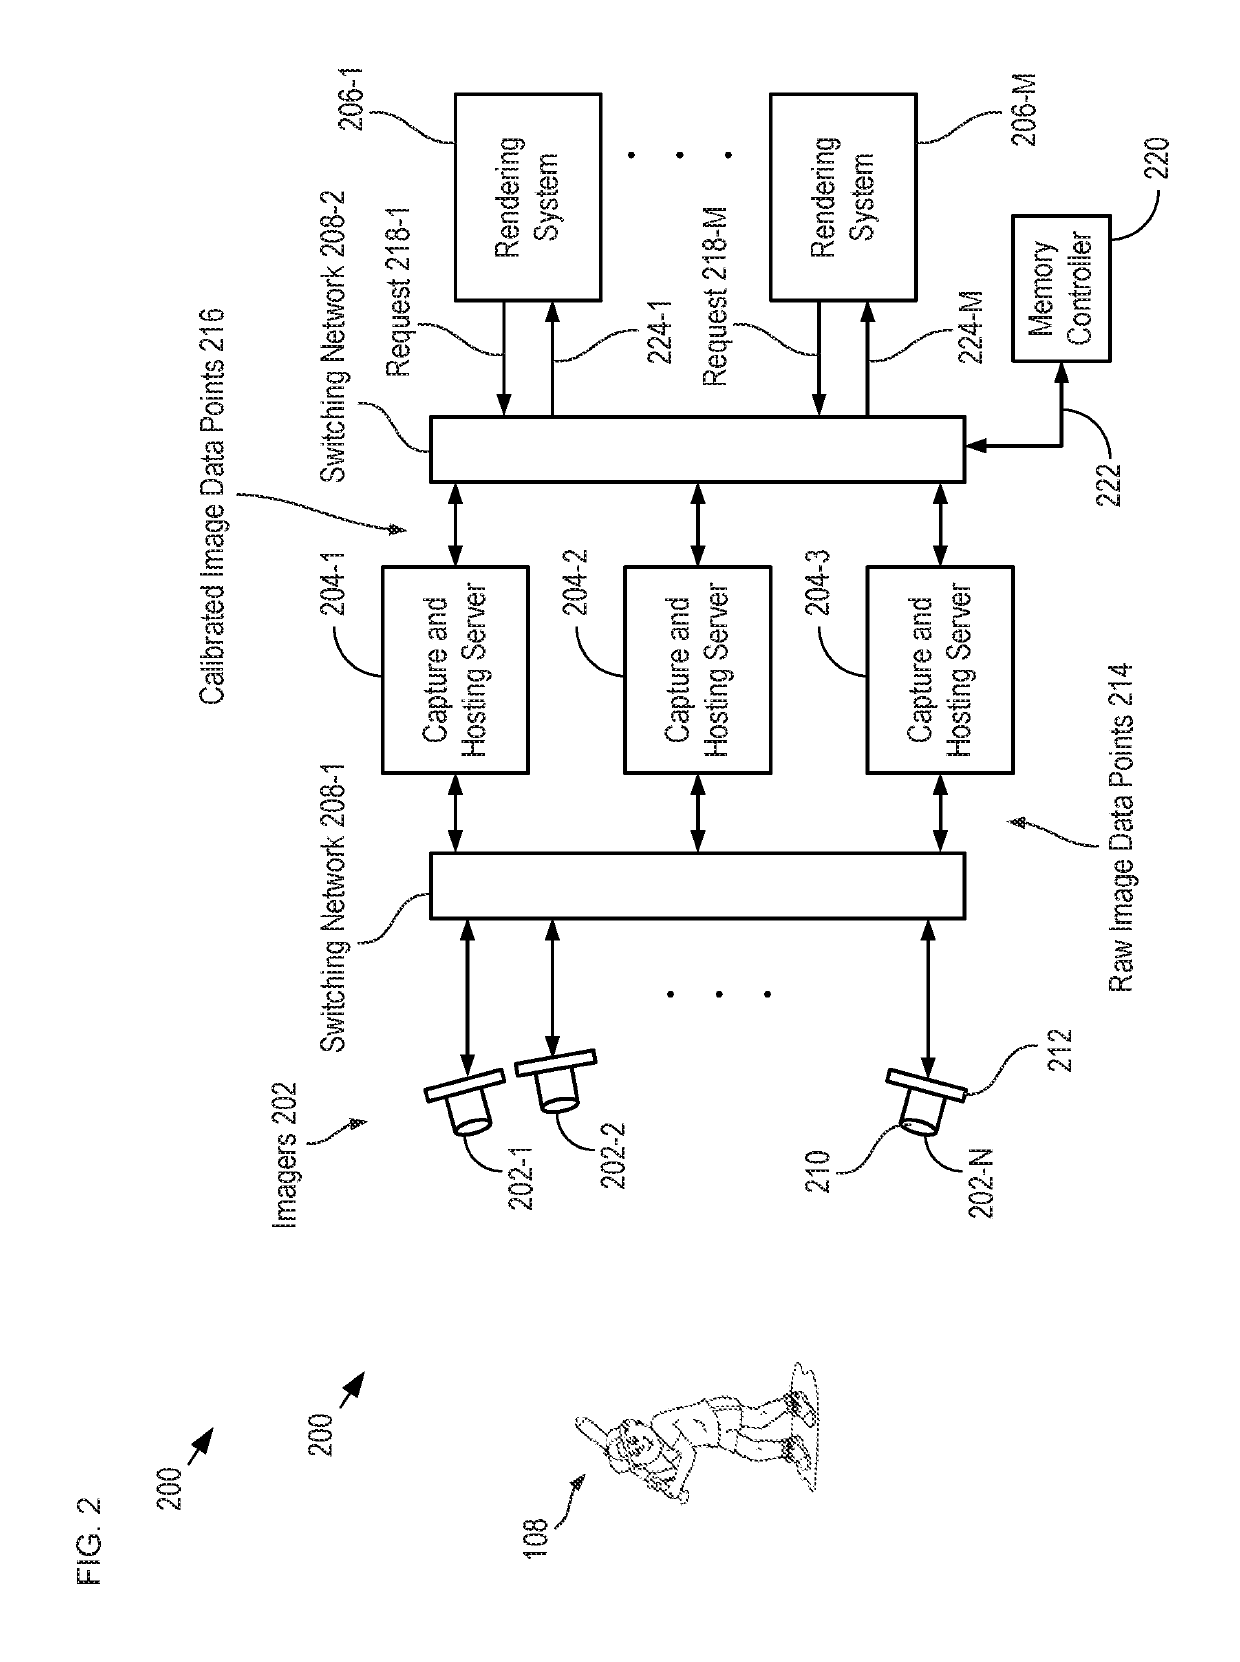 Multi-array camera imaging system and method therefor